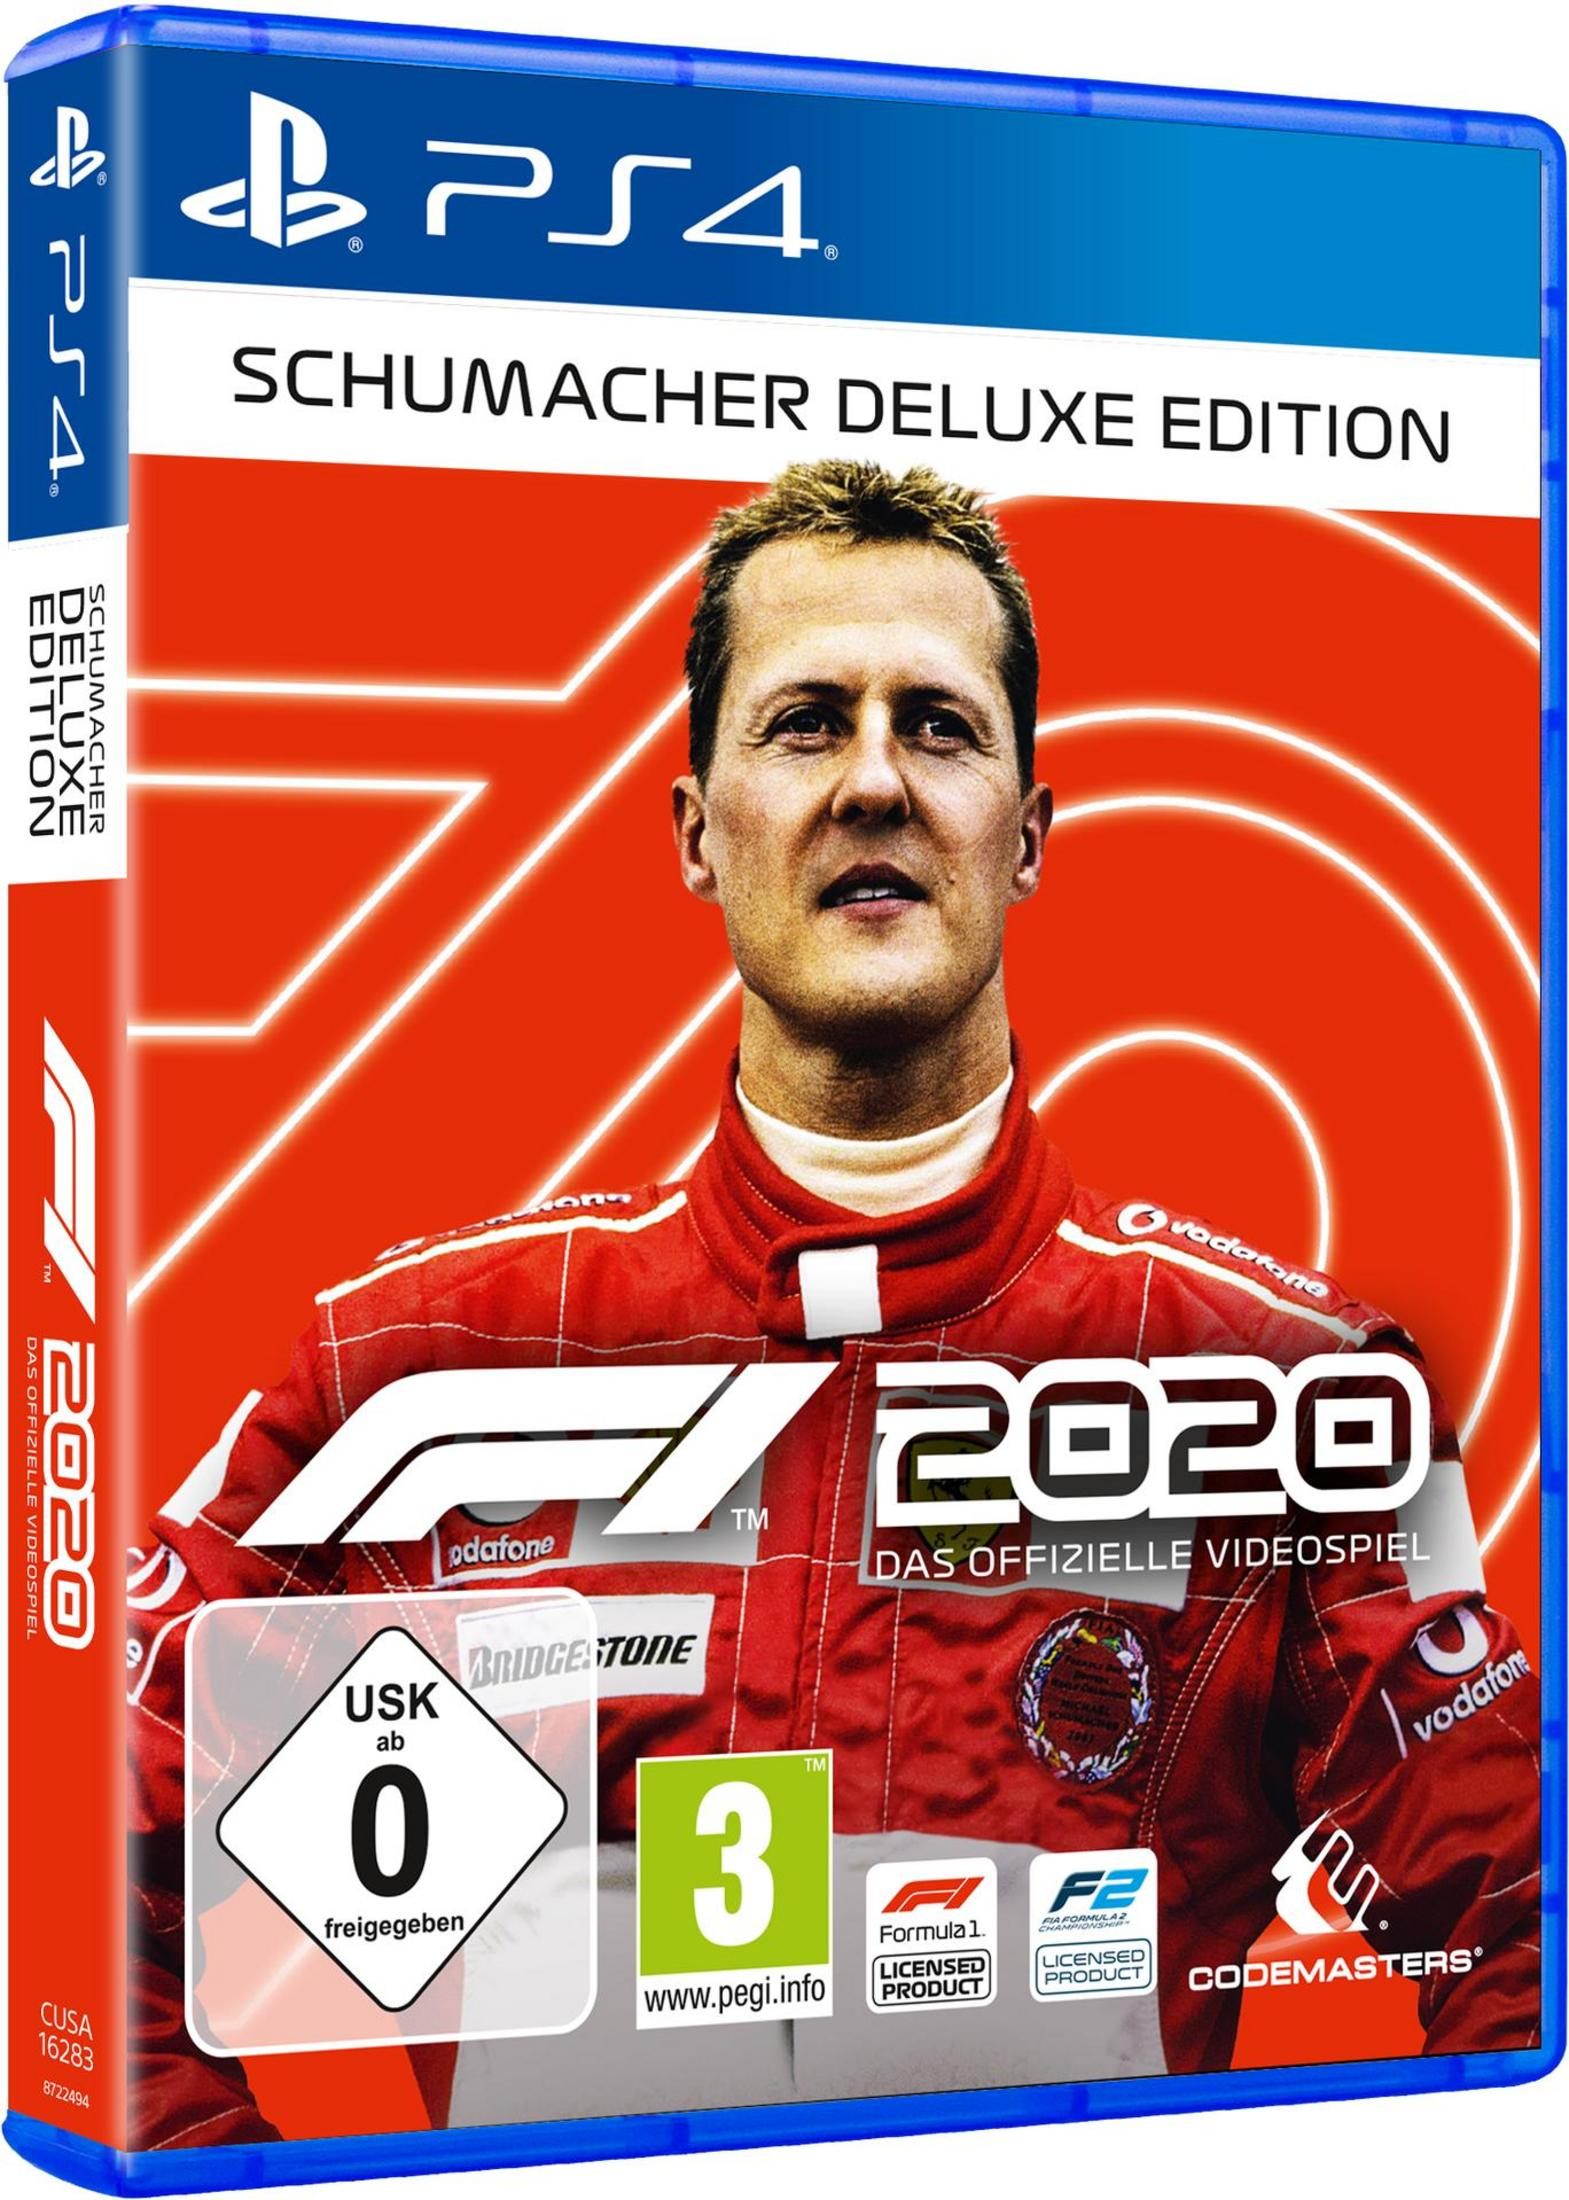 2020 [PlayStation Deluxe F1 - 4] Edition Schumacher